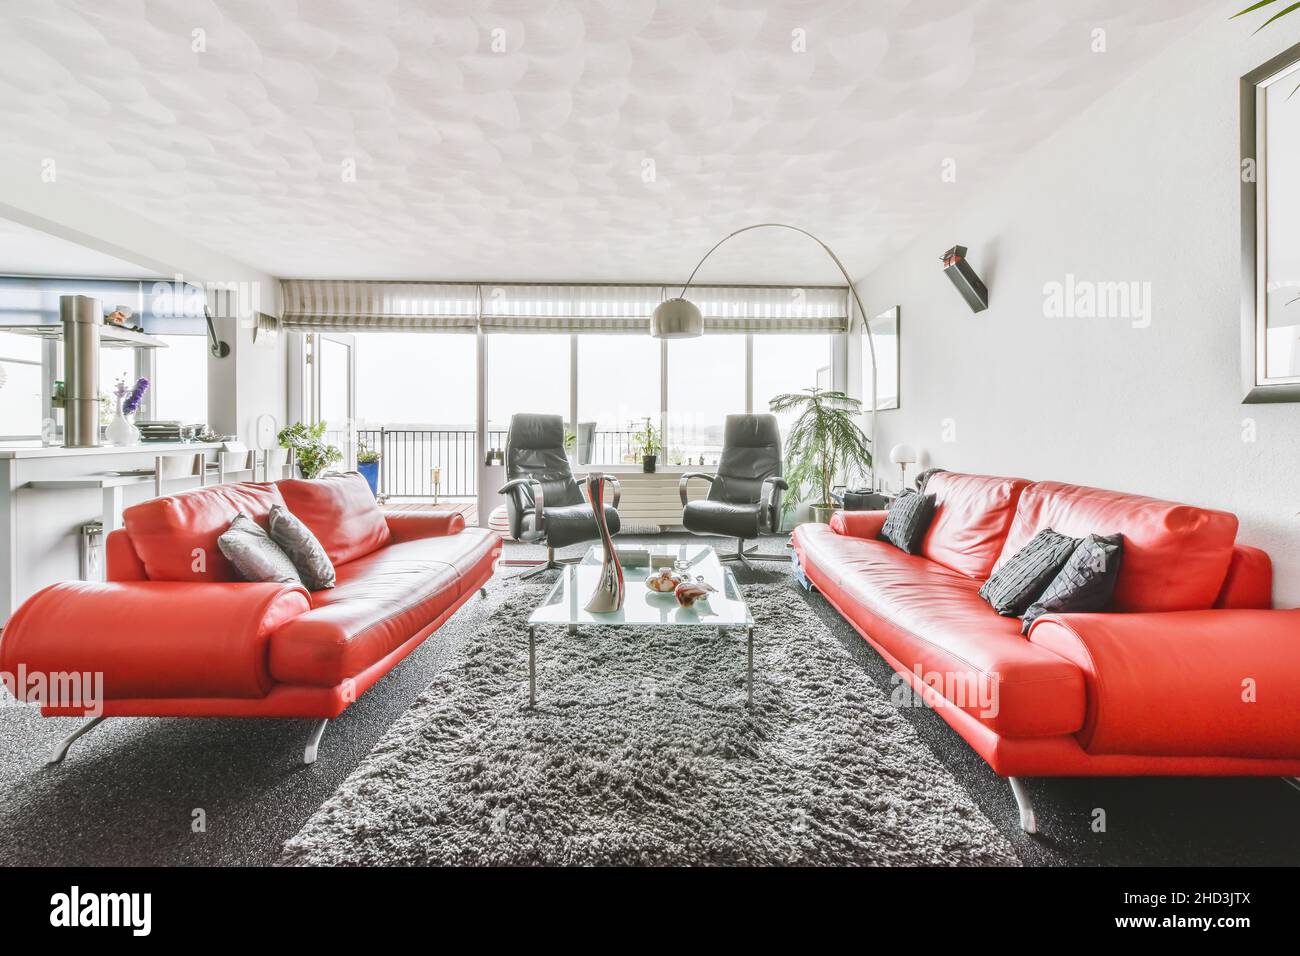 Lovely living room with red leather sofas and soft carpet Stock Photo